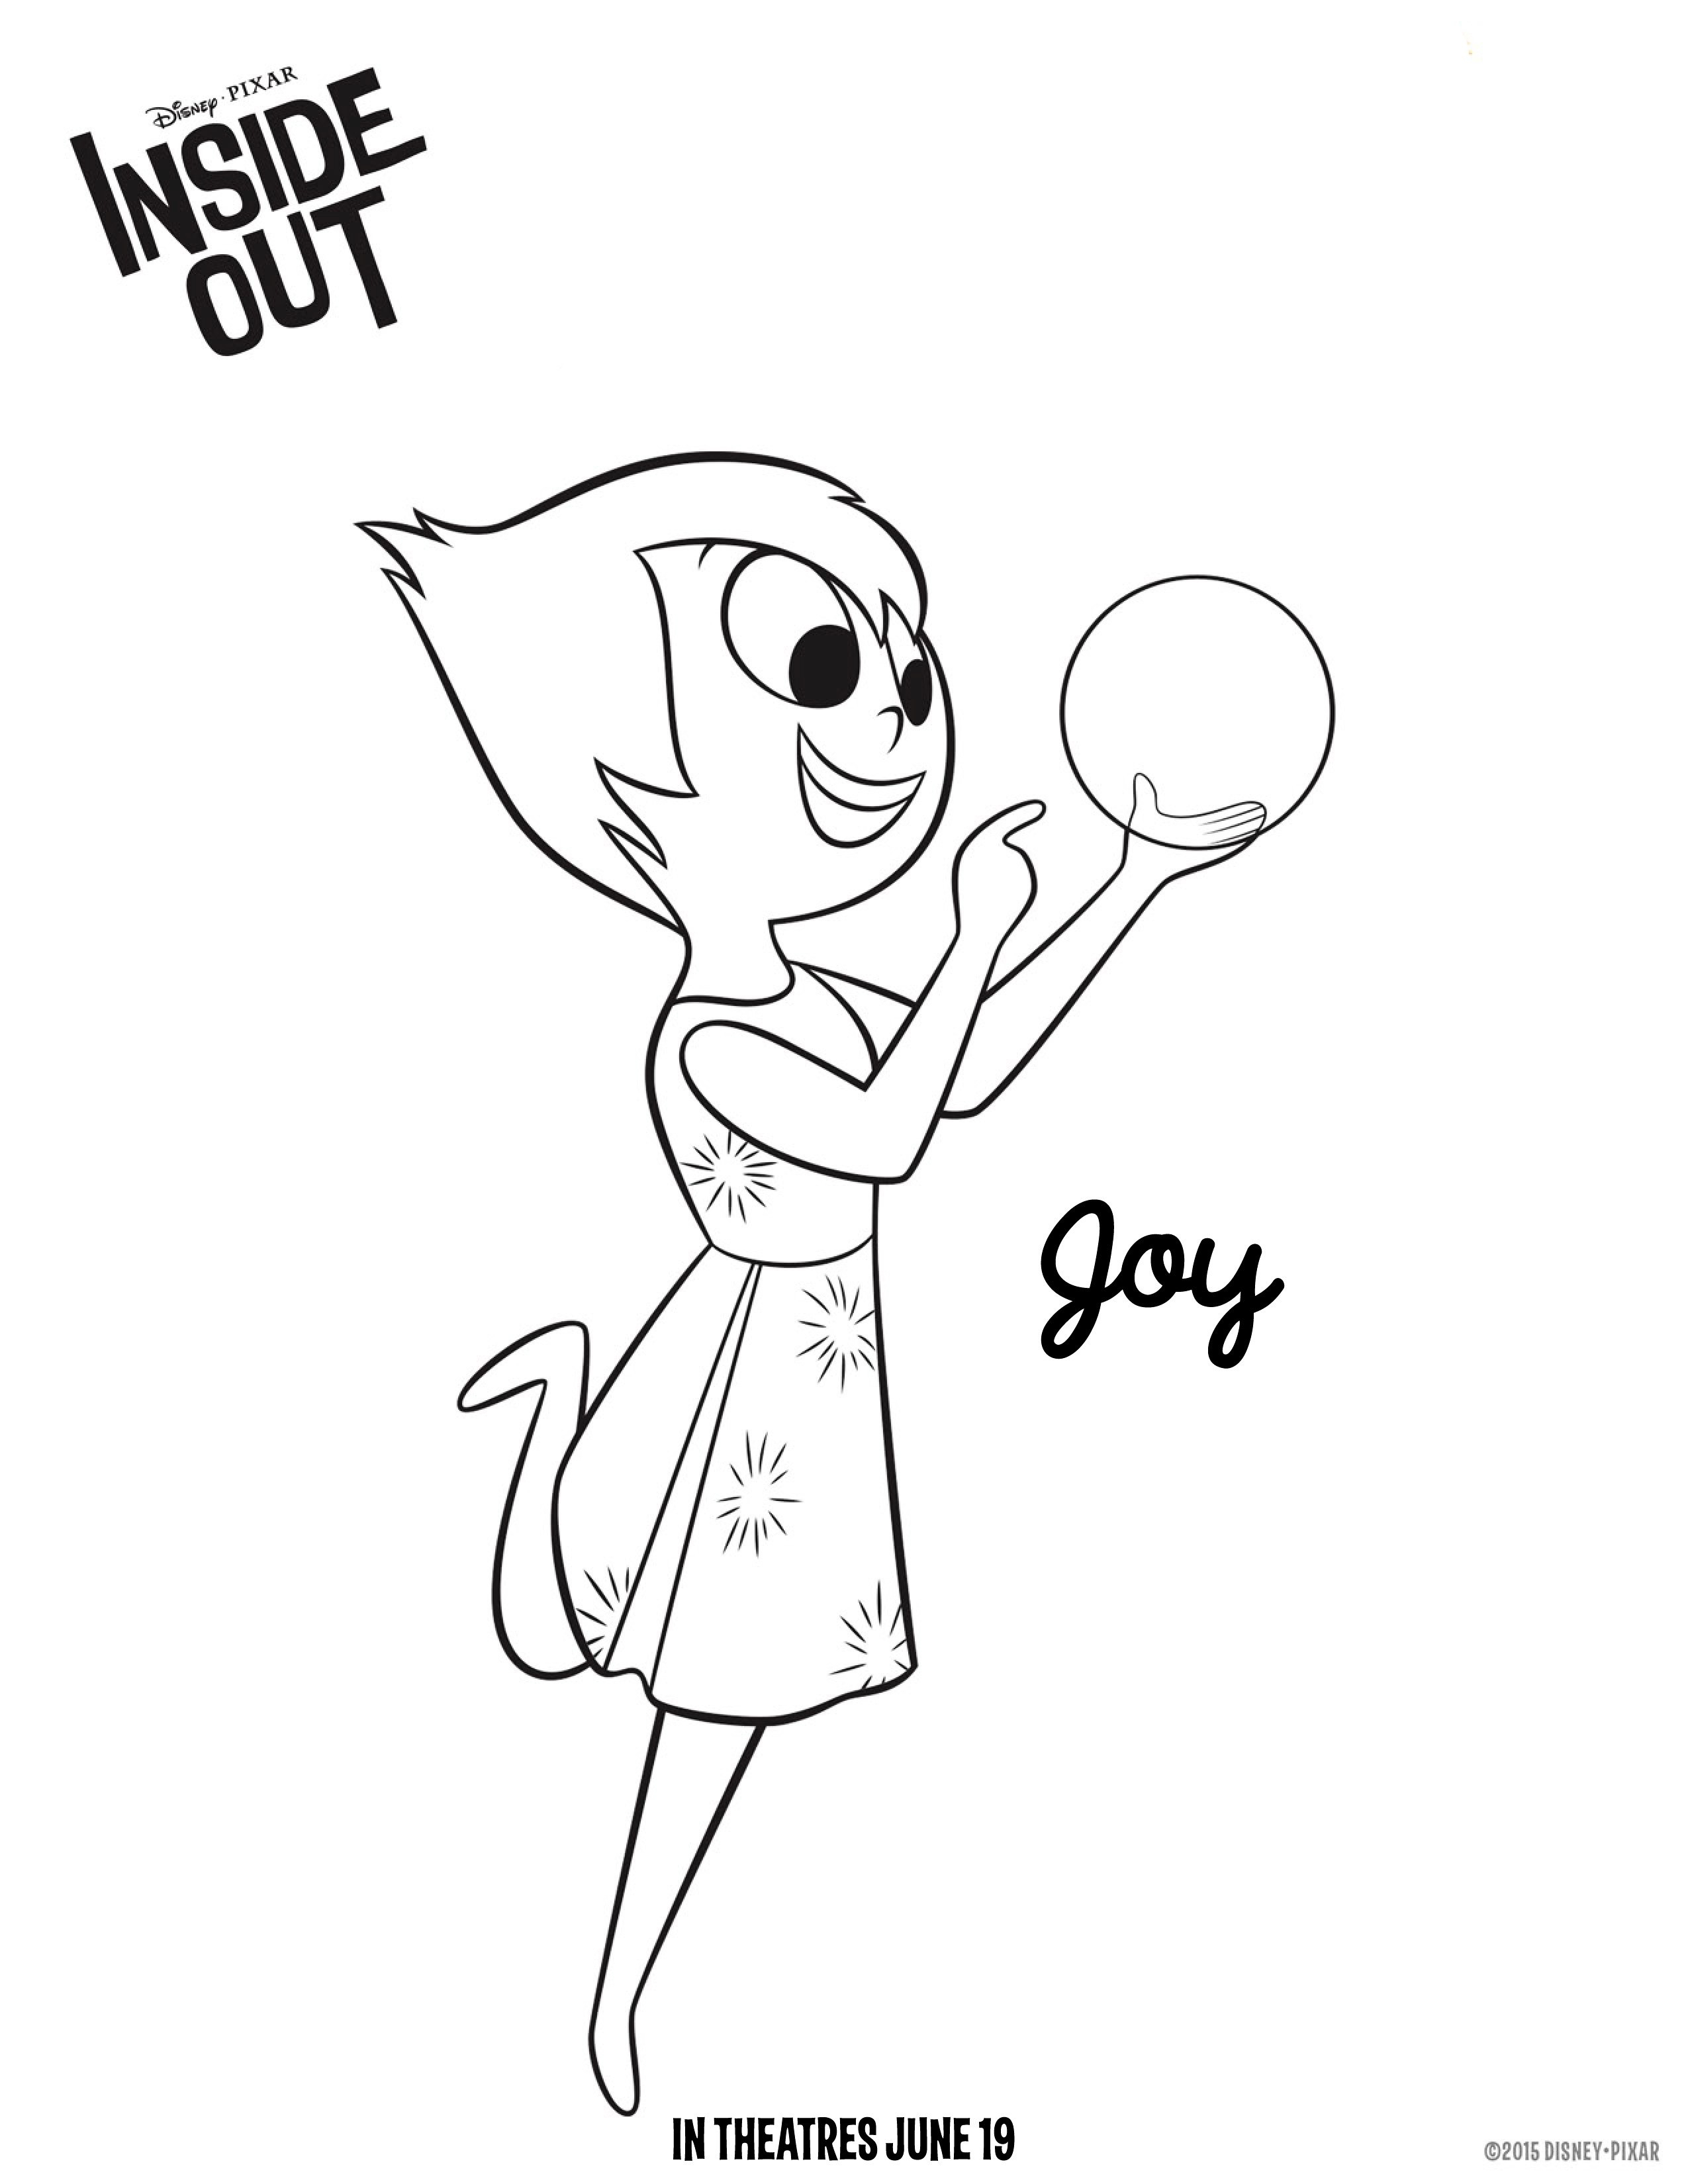 Inside Out Sadness Coloring Page Coloring Pages Inside Out Sadness Copy Best For Kids Disney